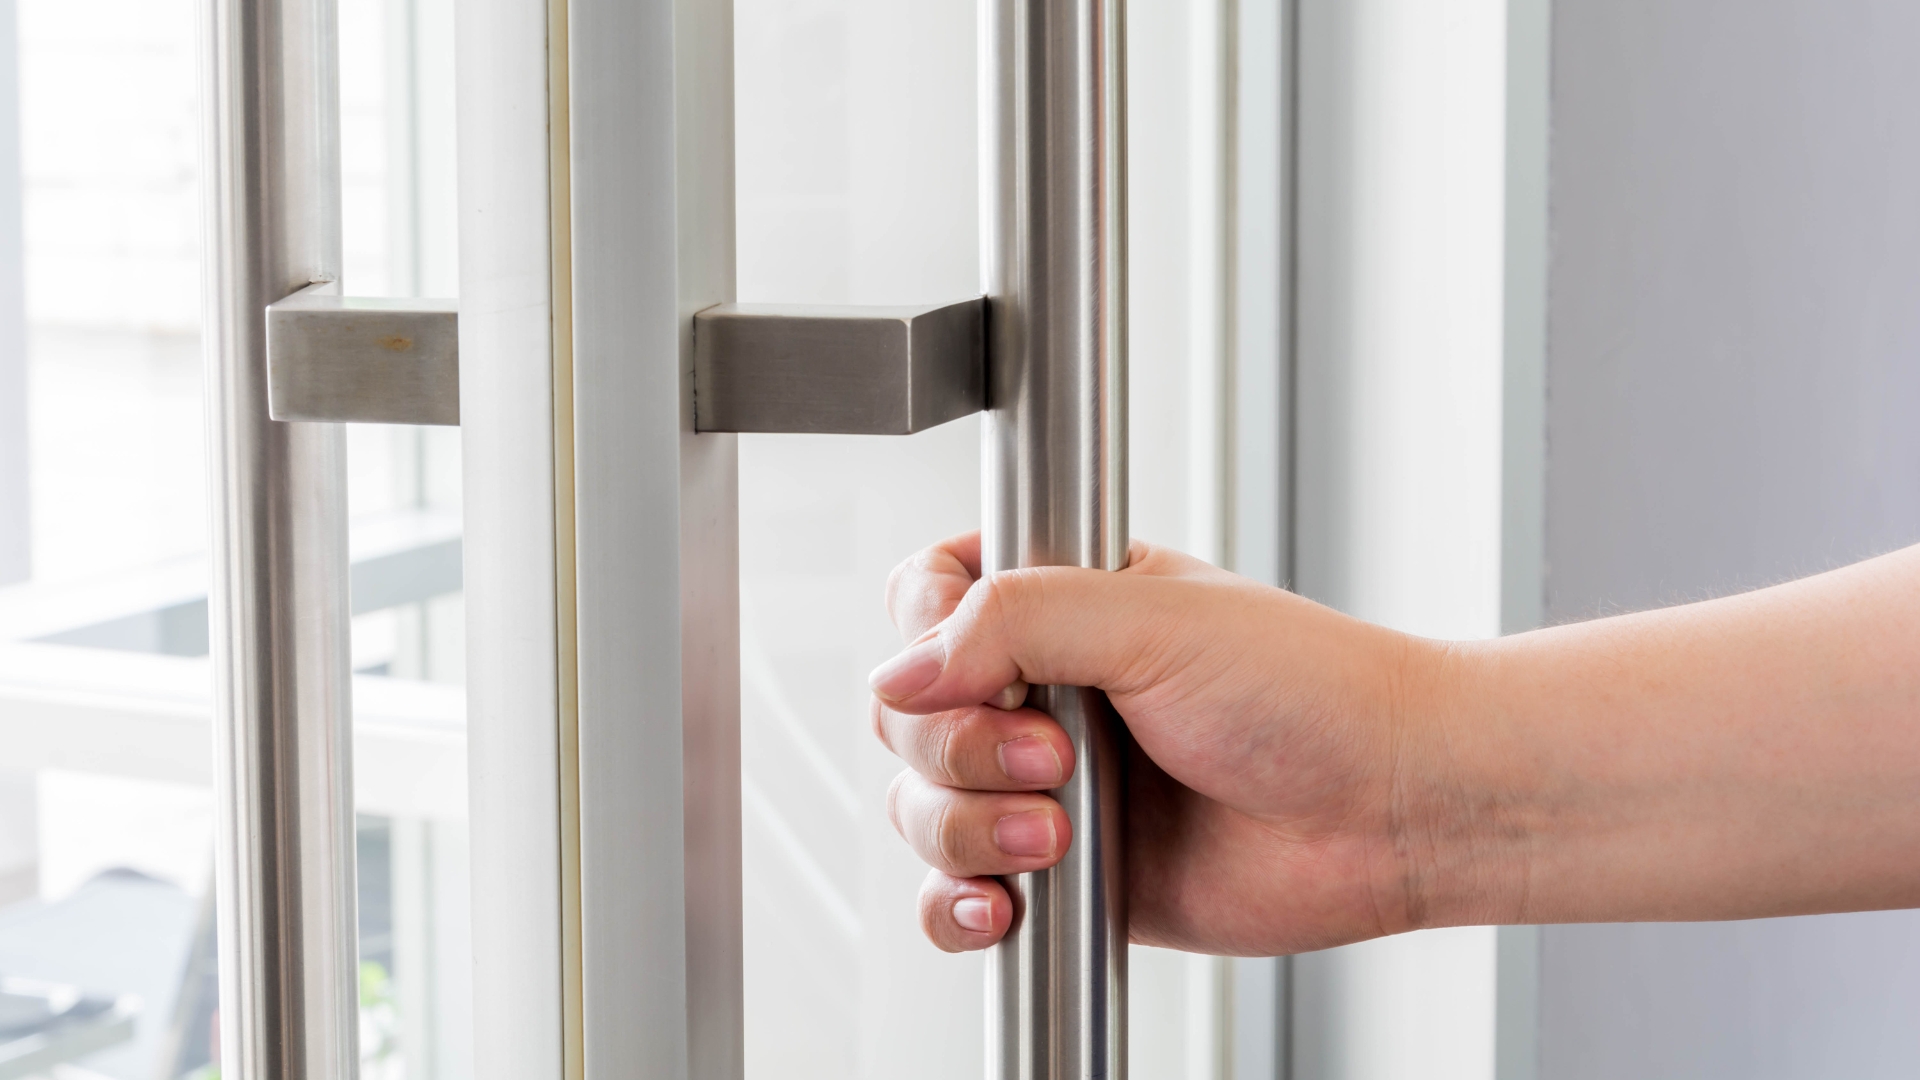 A user pulling open a glass commercial door